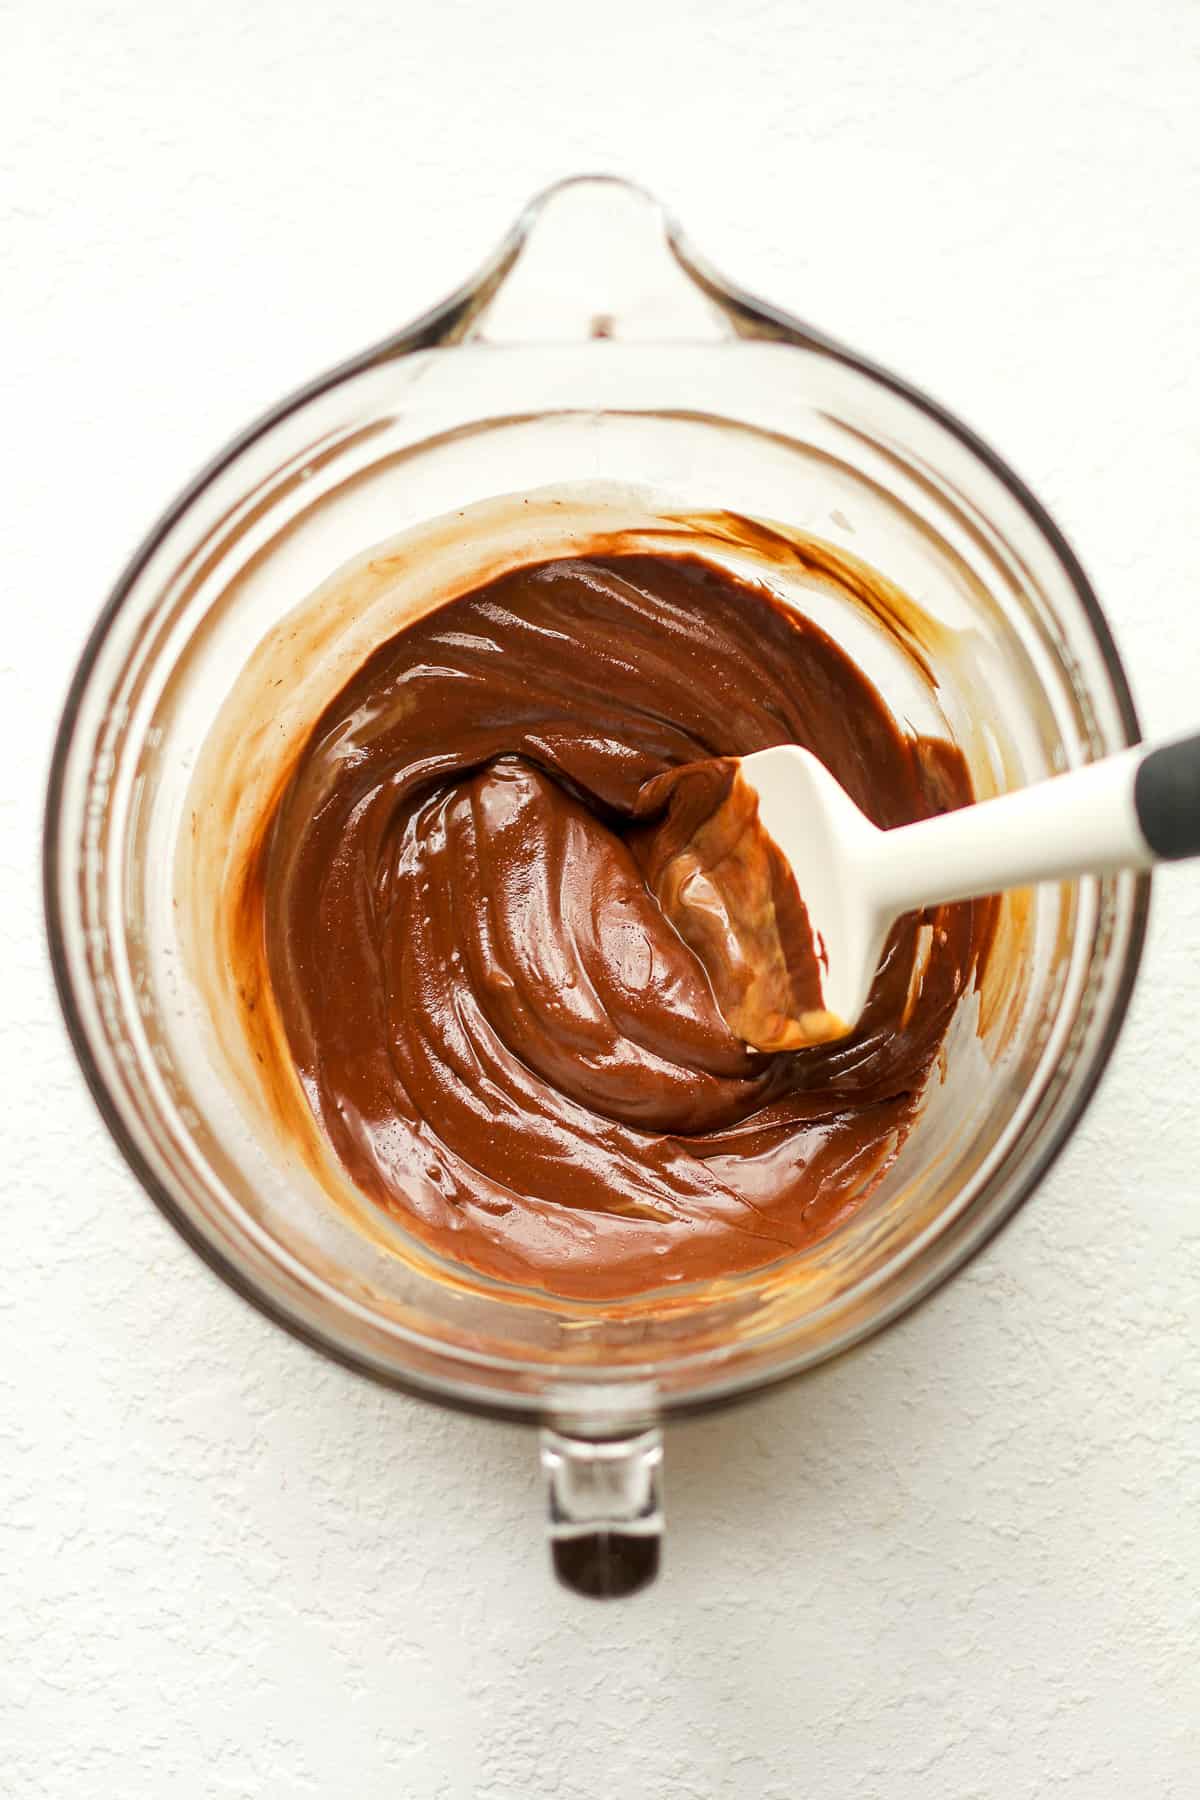 A bowl of the chocolate mixture melted with a spatula.